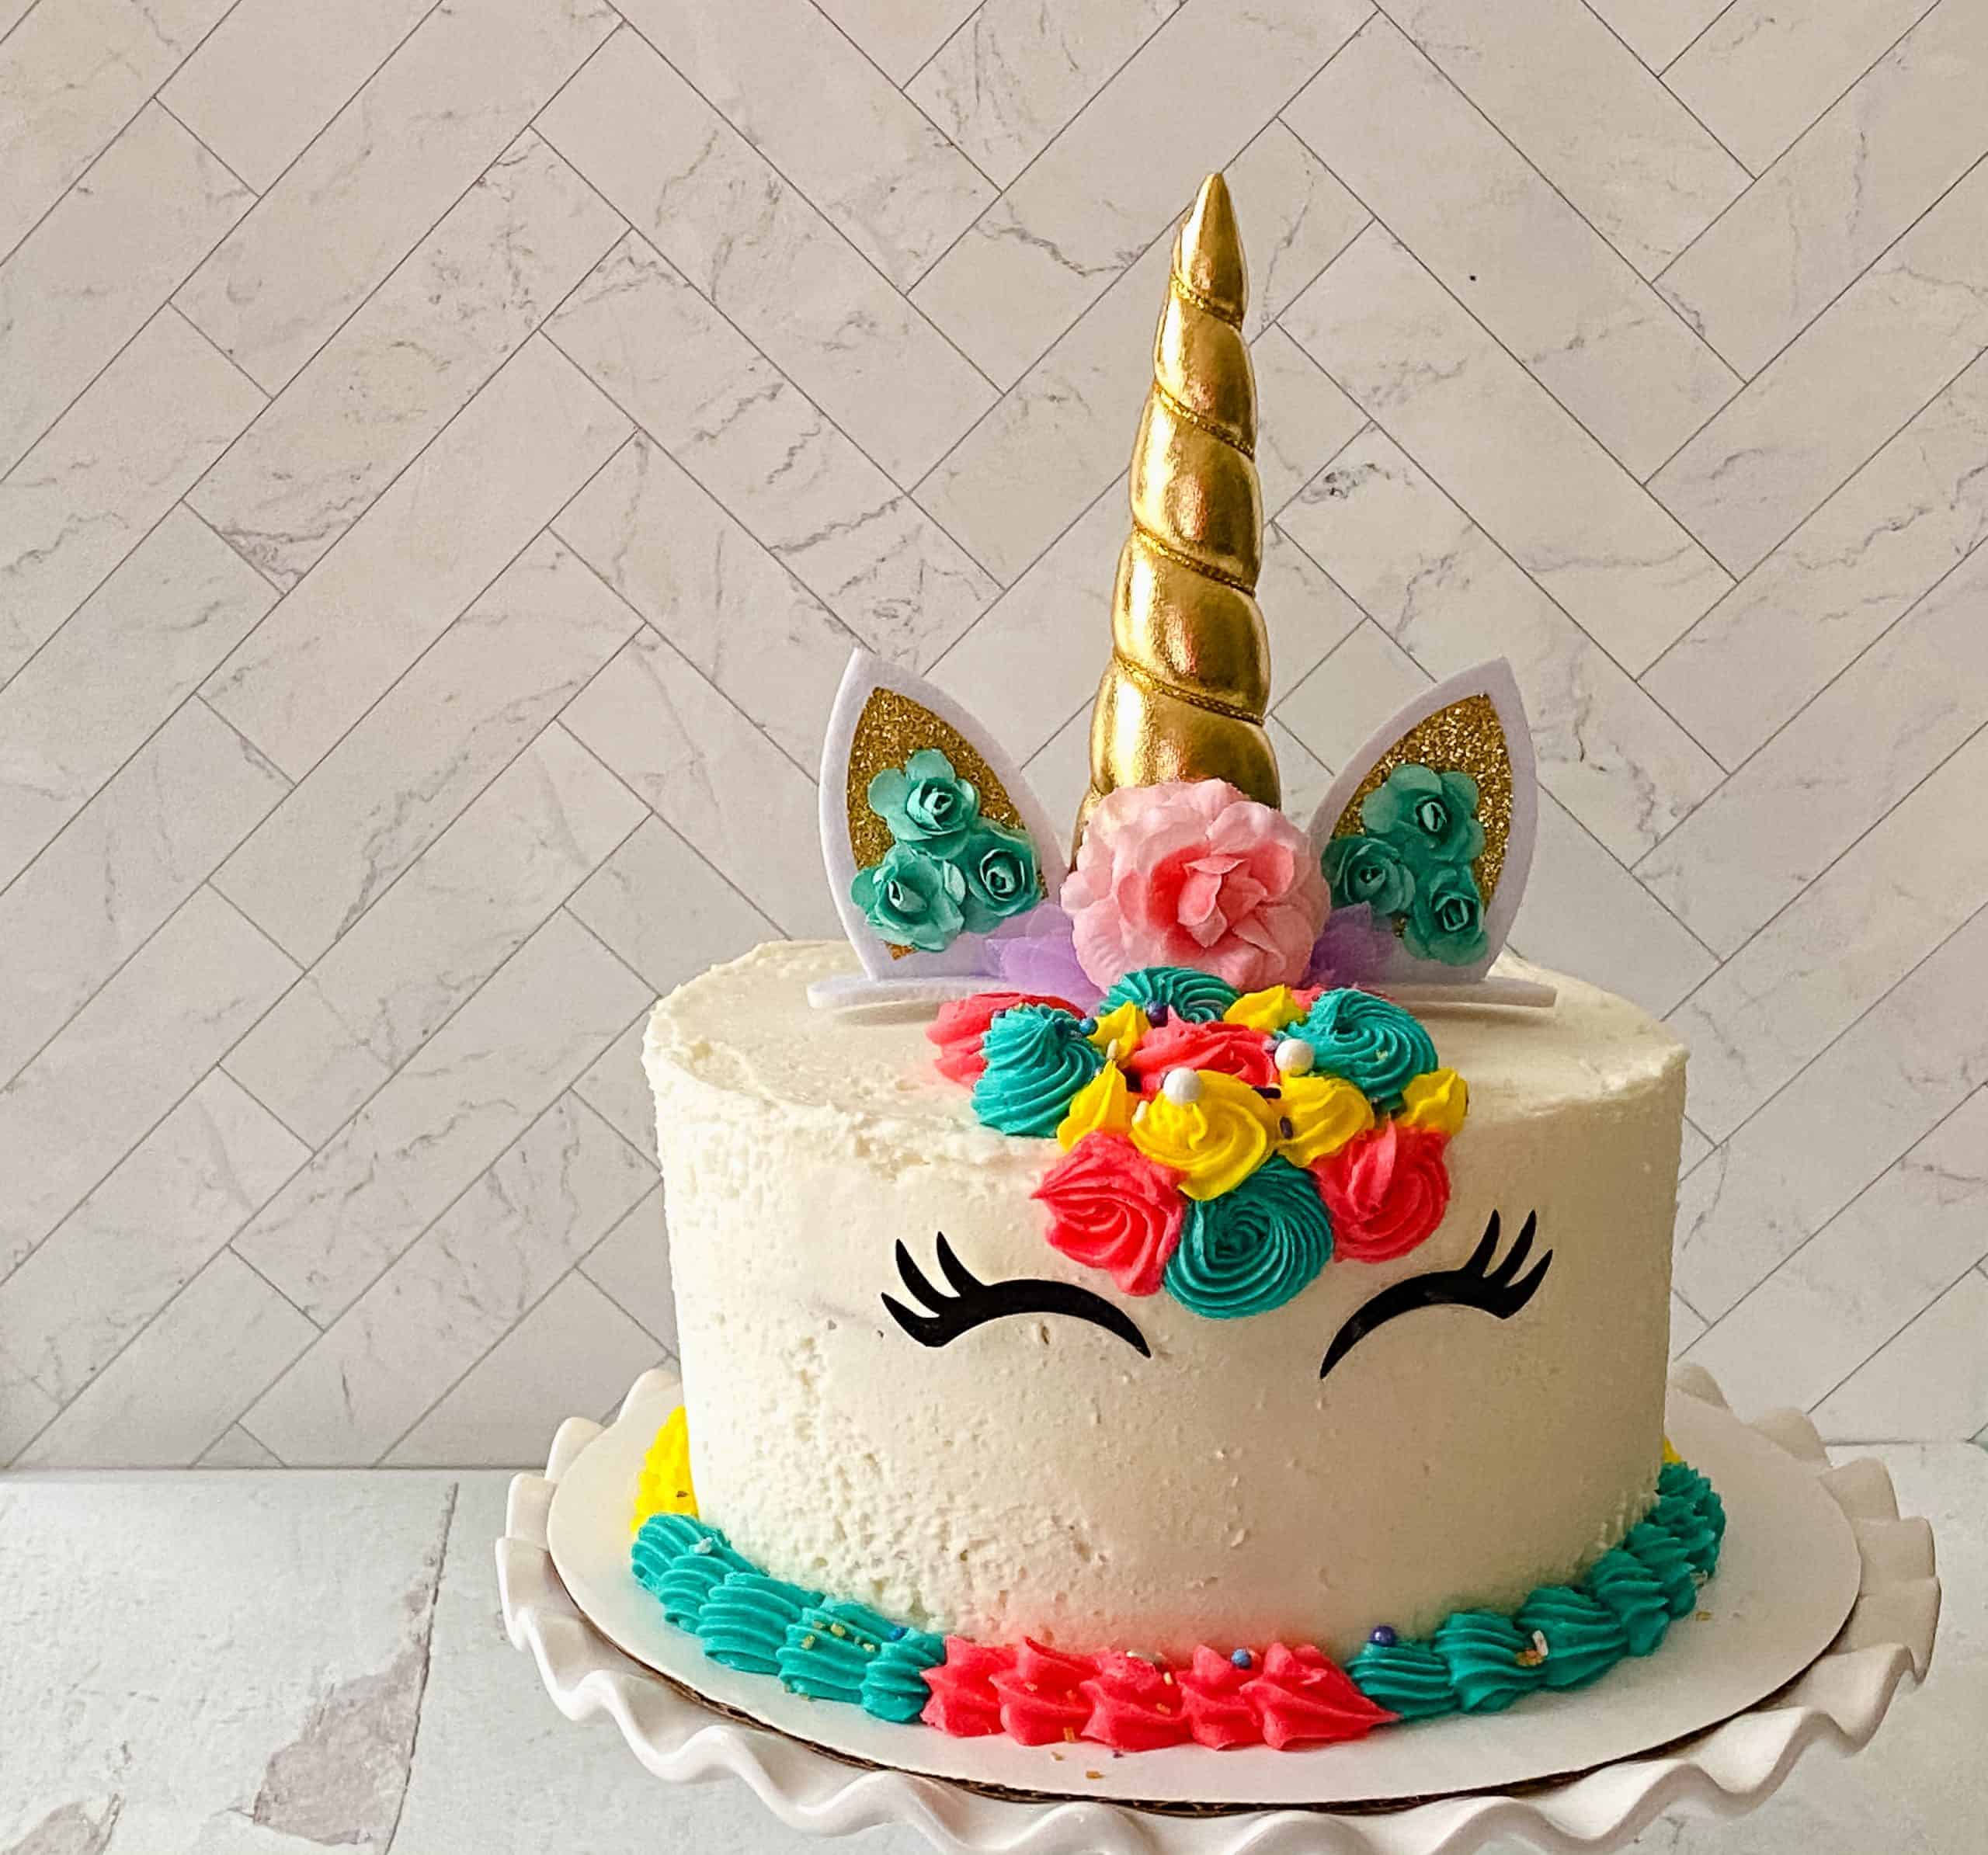 How to Bake and Decorate a Spectacular Unicorn Cake